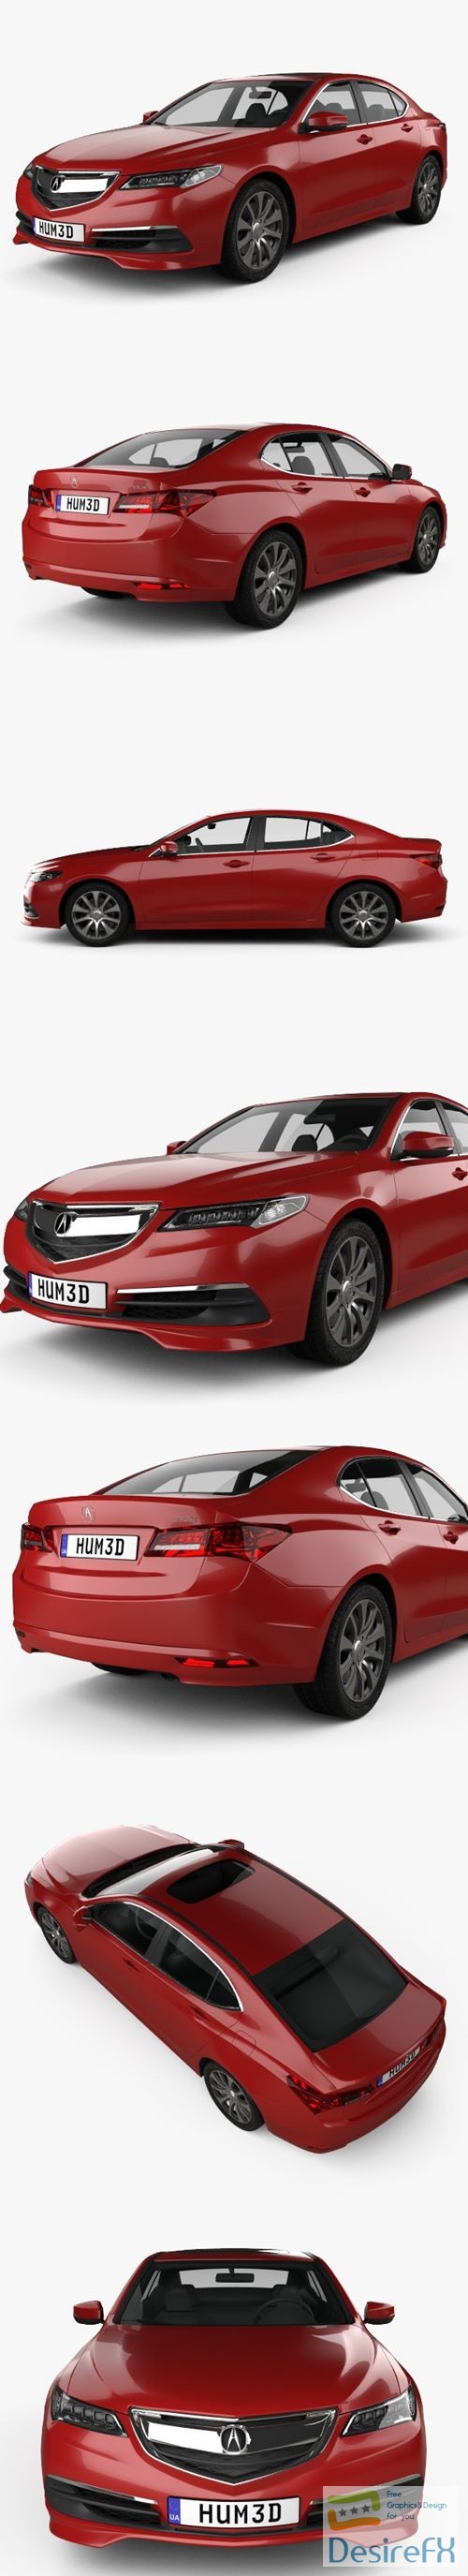 Acura TLX 2014 3D Model